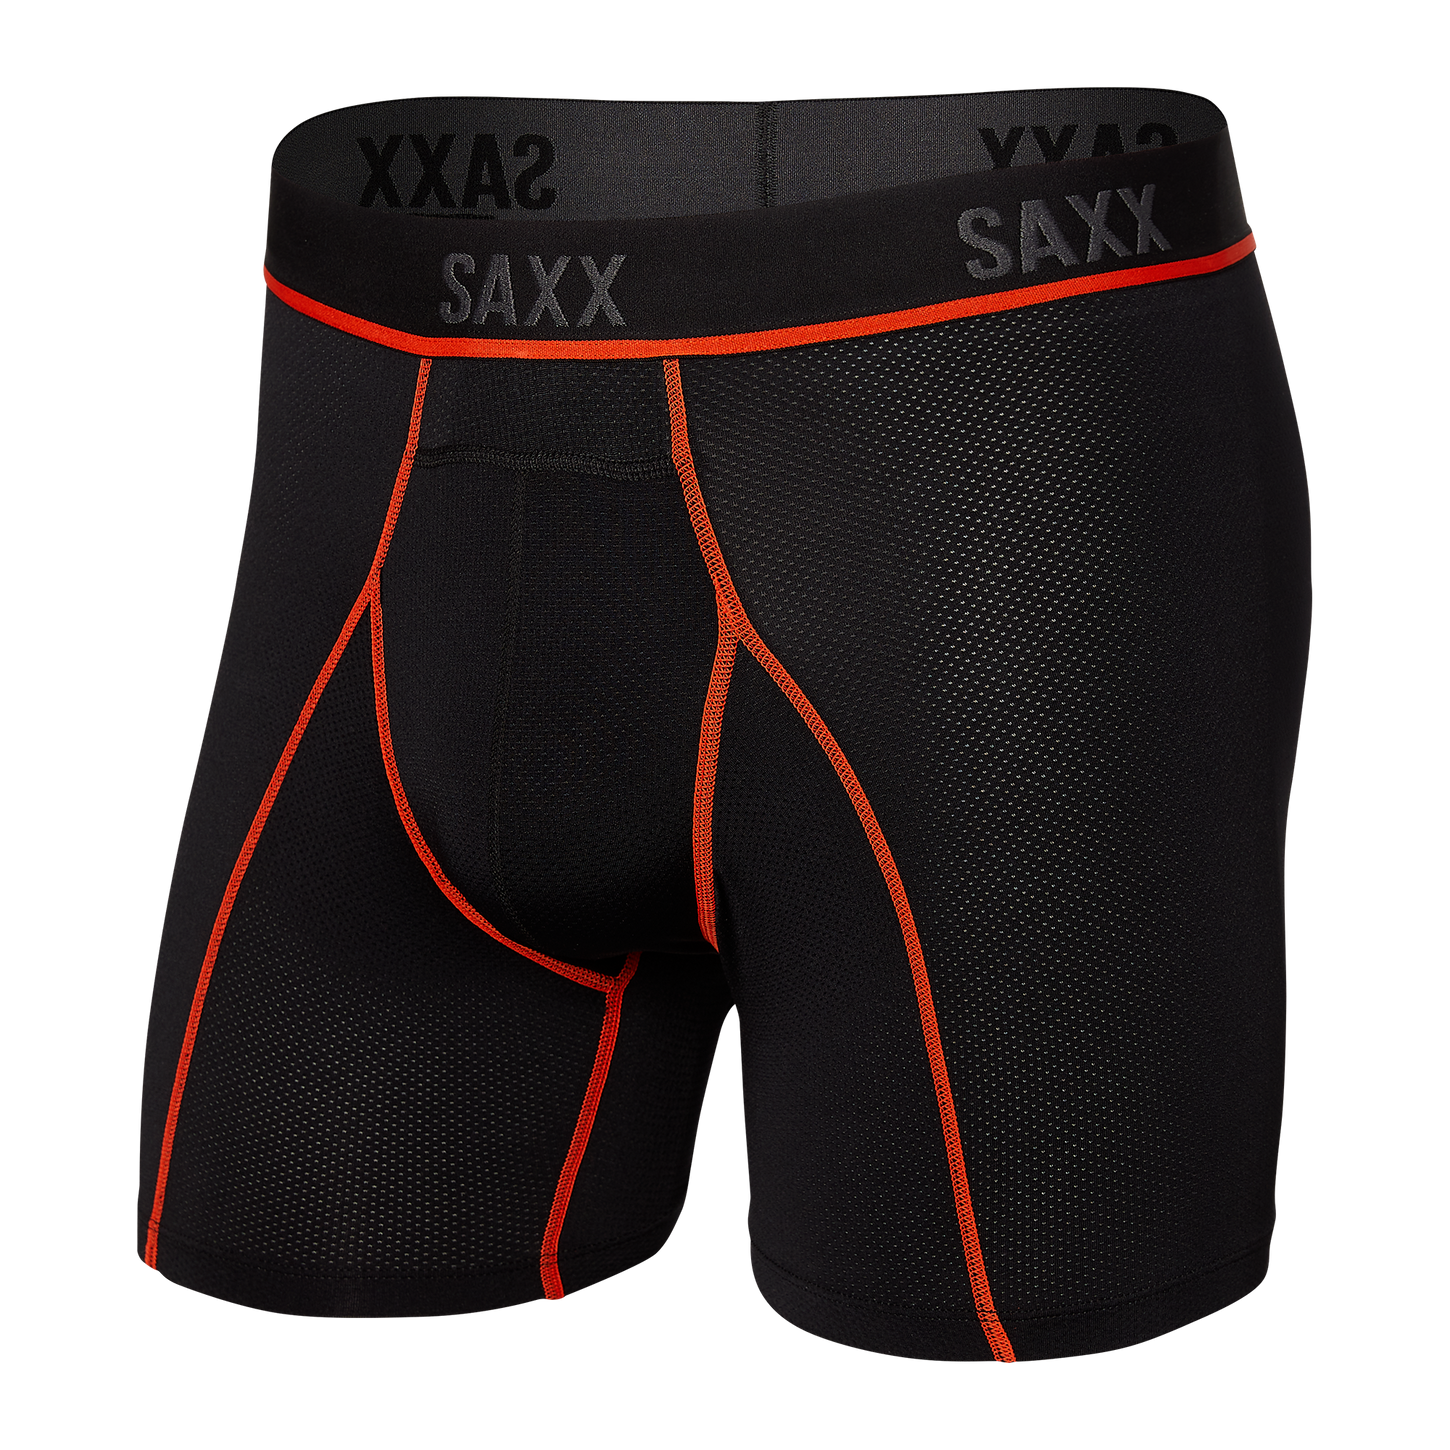 Medium,Black Mens Made in Canada Boxer Brief Underwear Light Weight Casual Breathable Soft Cotton 